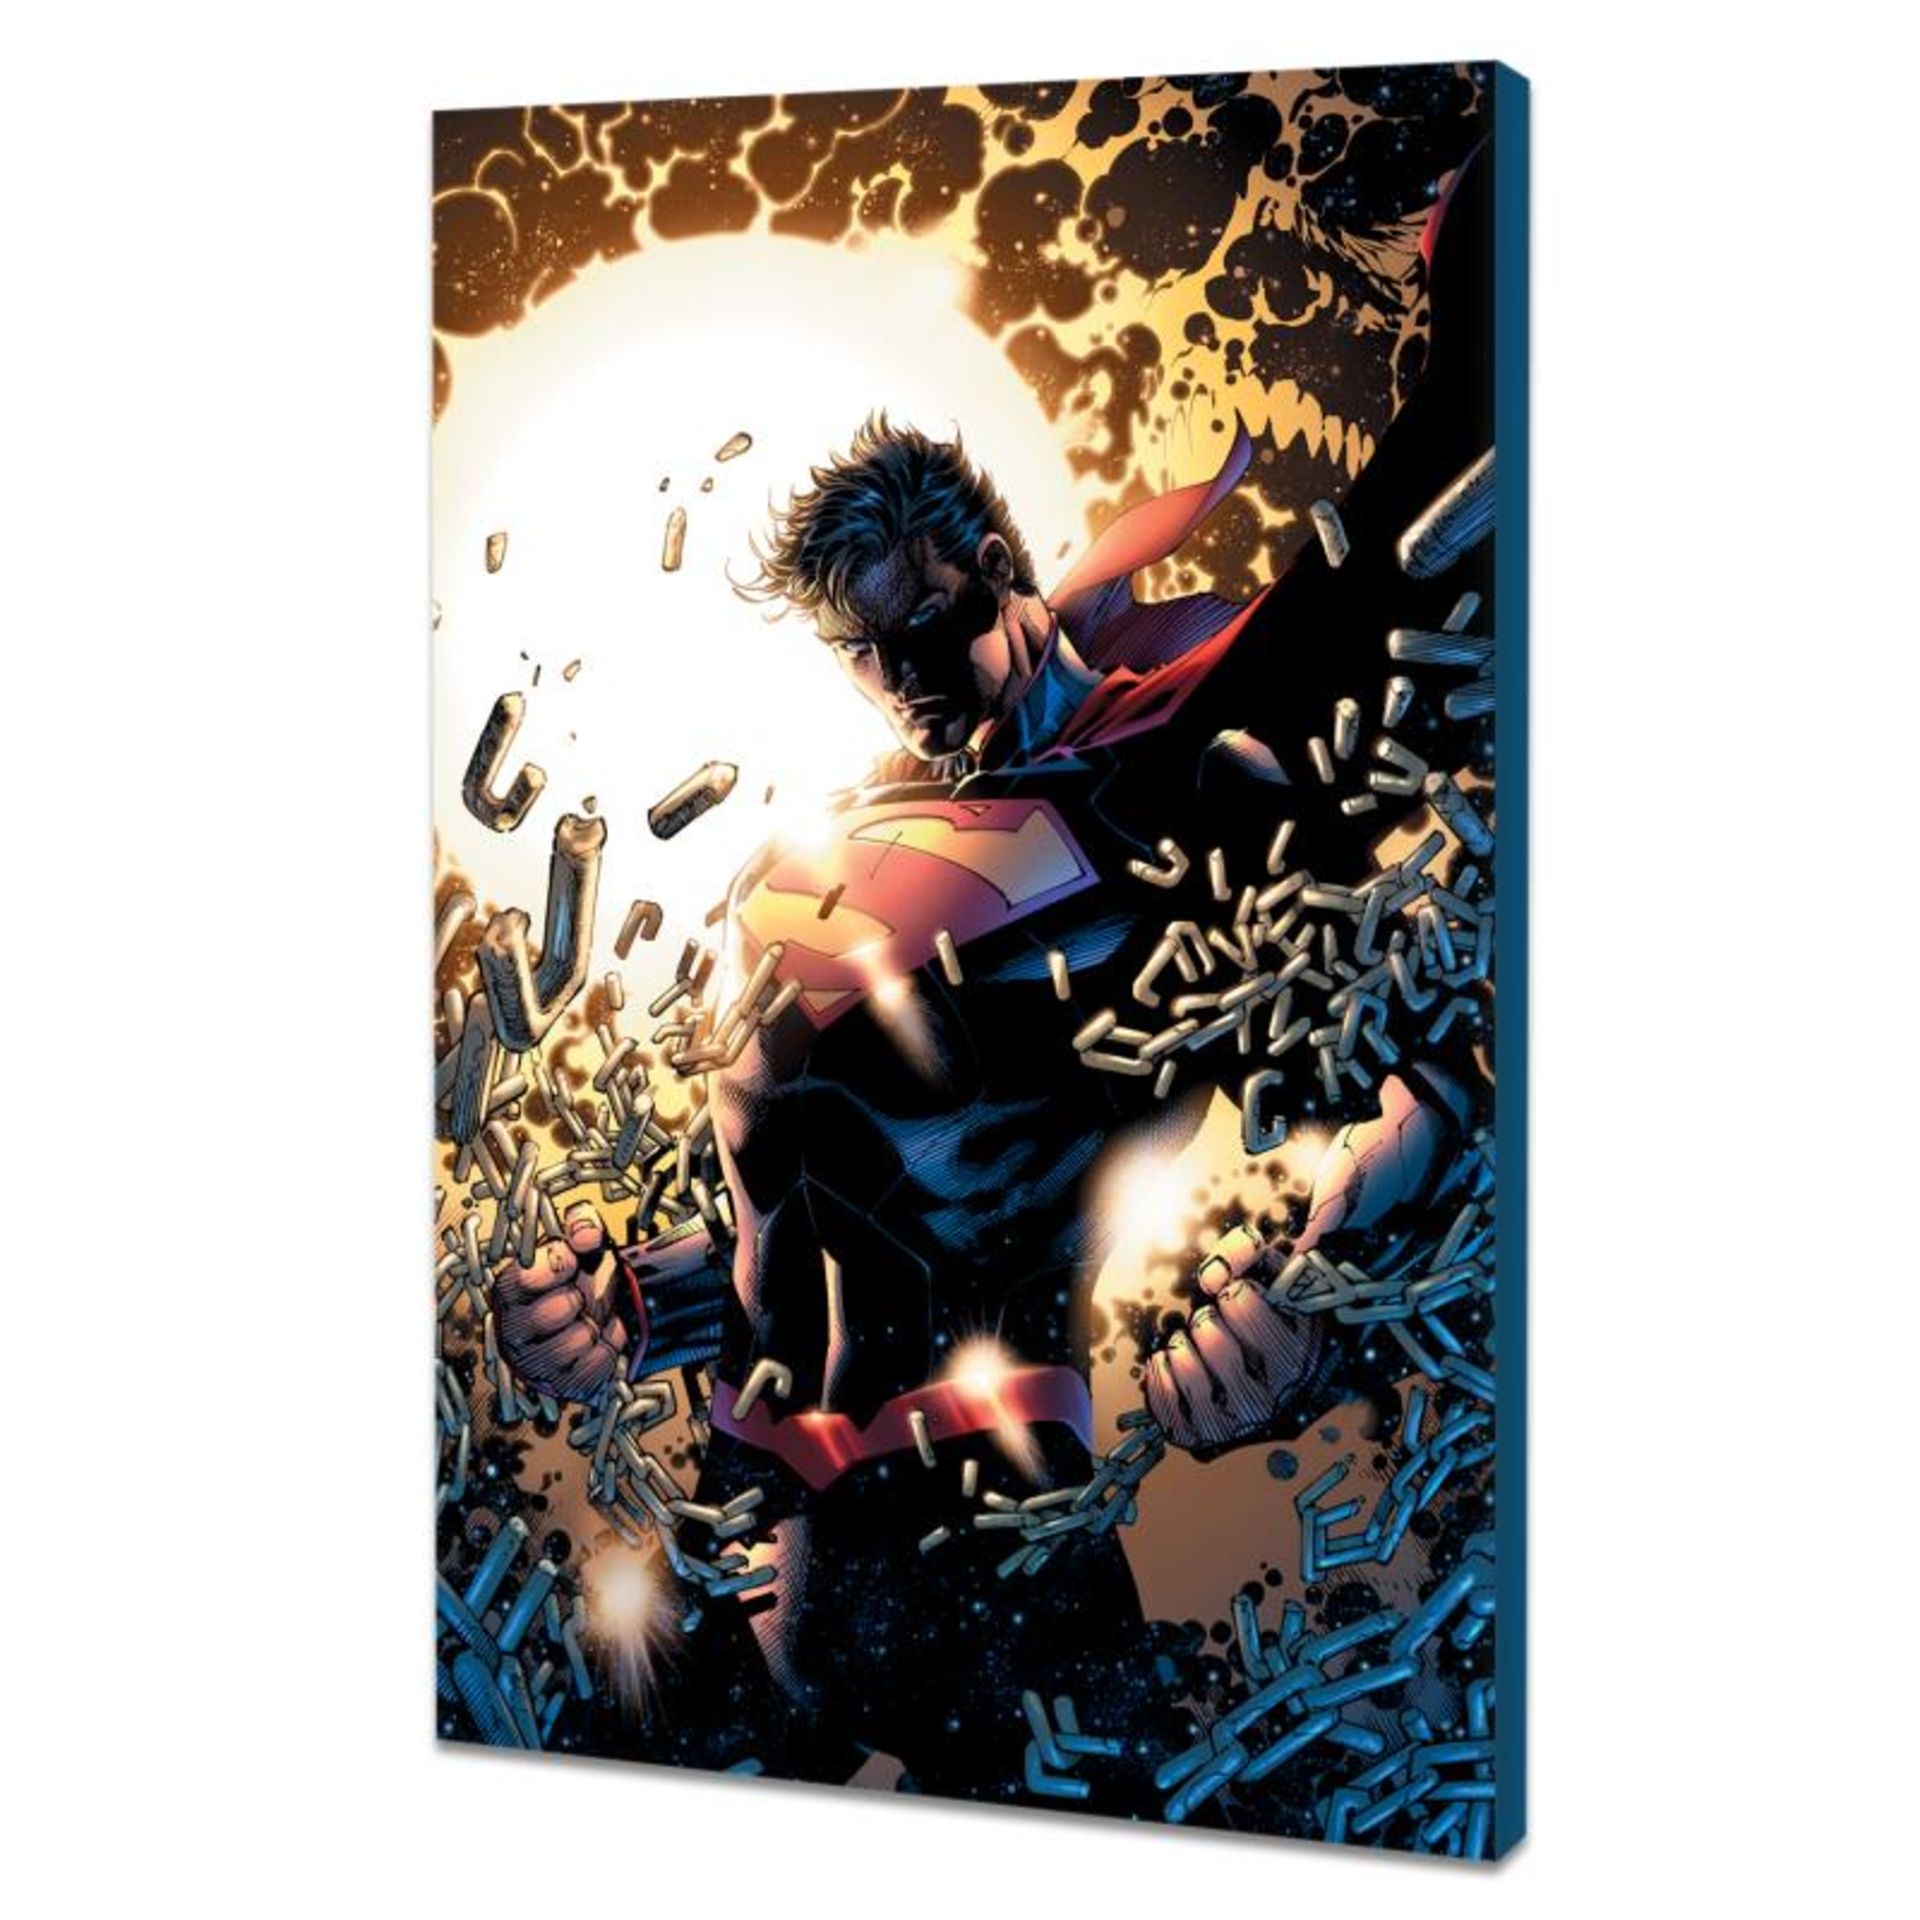 Superman Unchained by DC Comics - Image 3 of 3